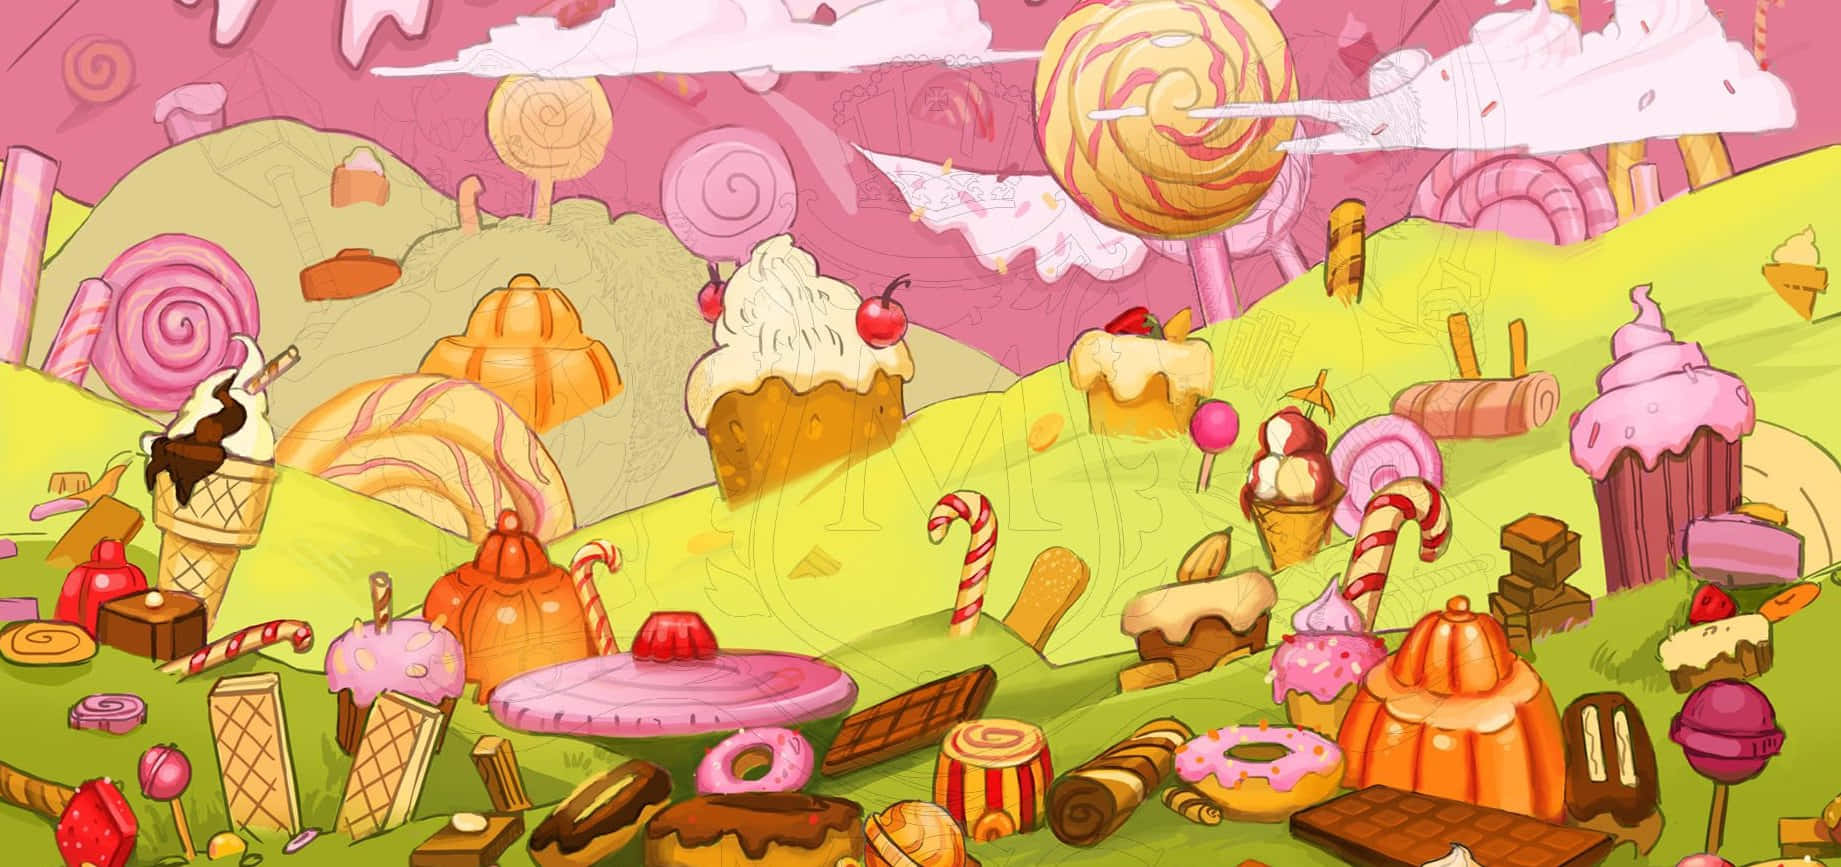 A Cartoon Illustration Of A Candy Land